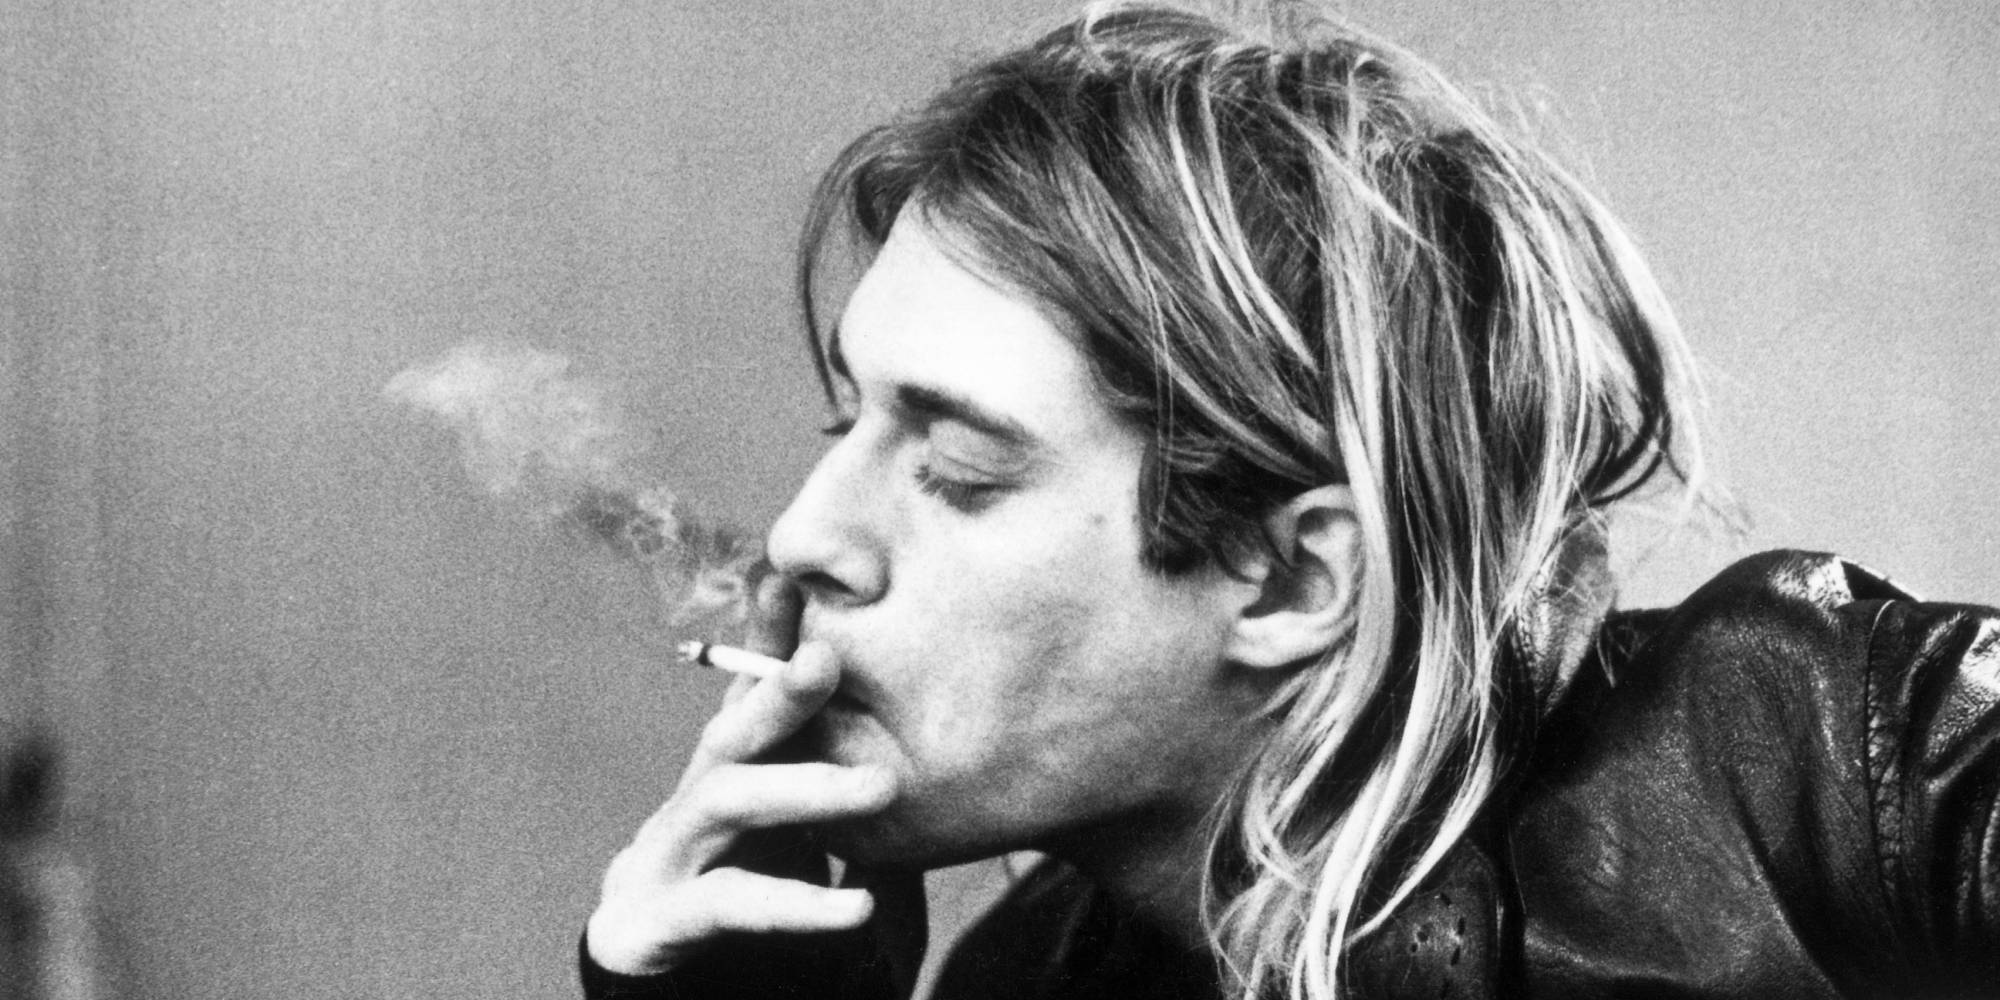 Behind The Scenes Stories You've Never Heard Before About Nirvana